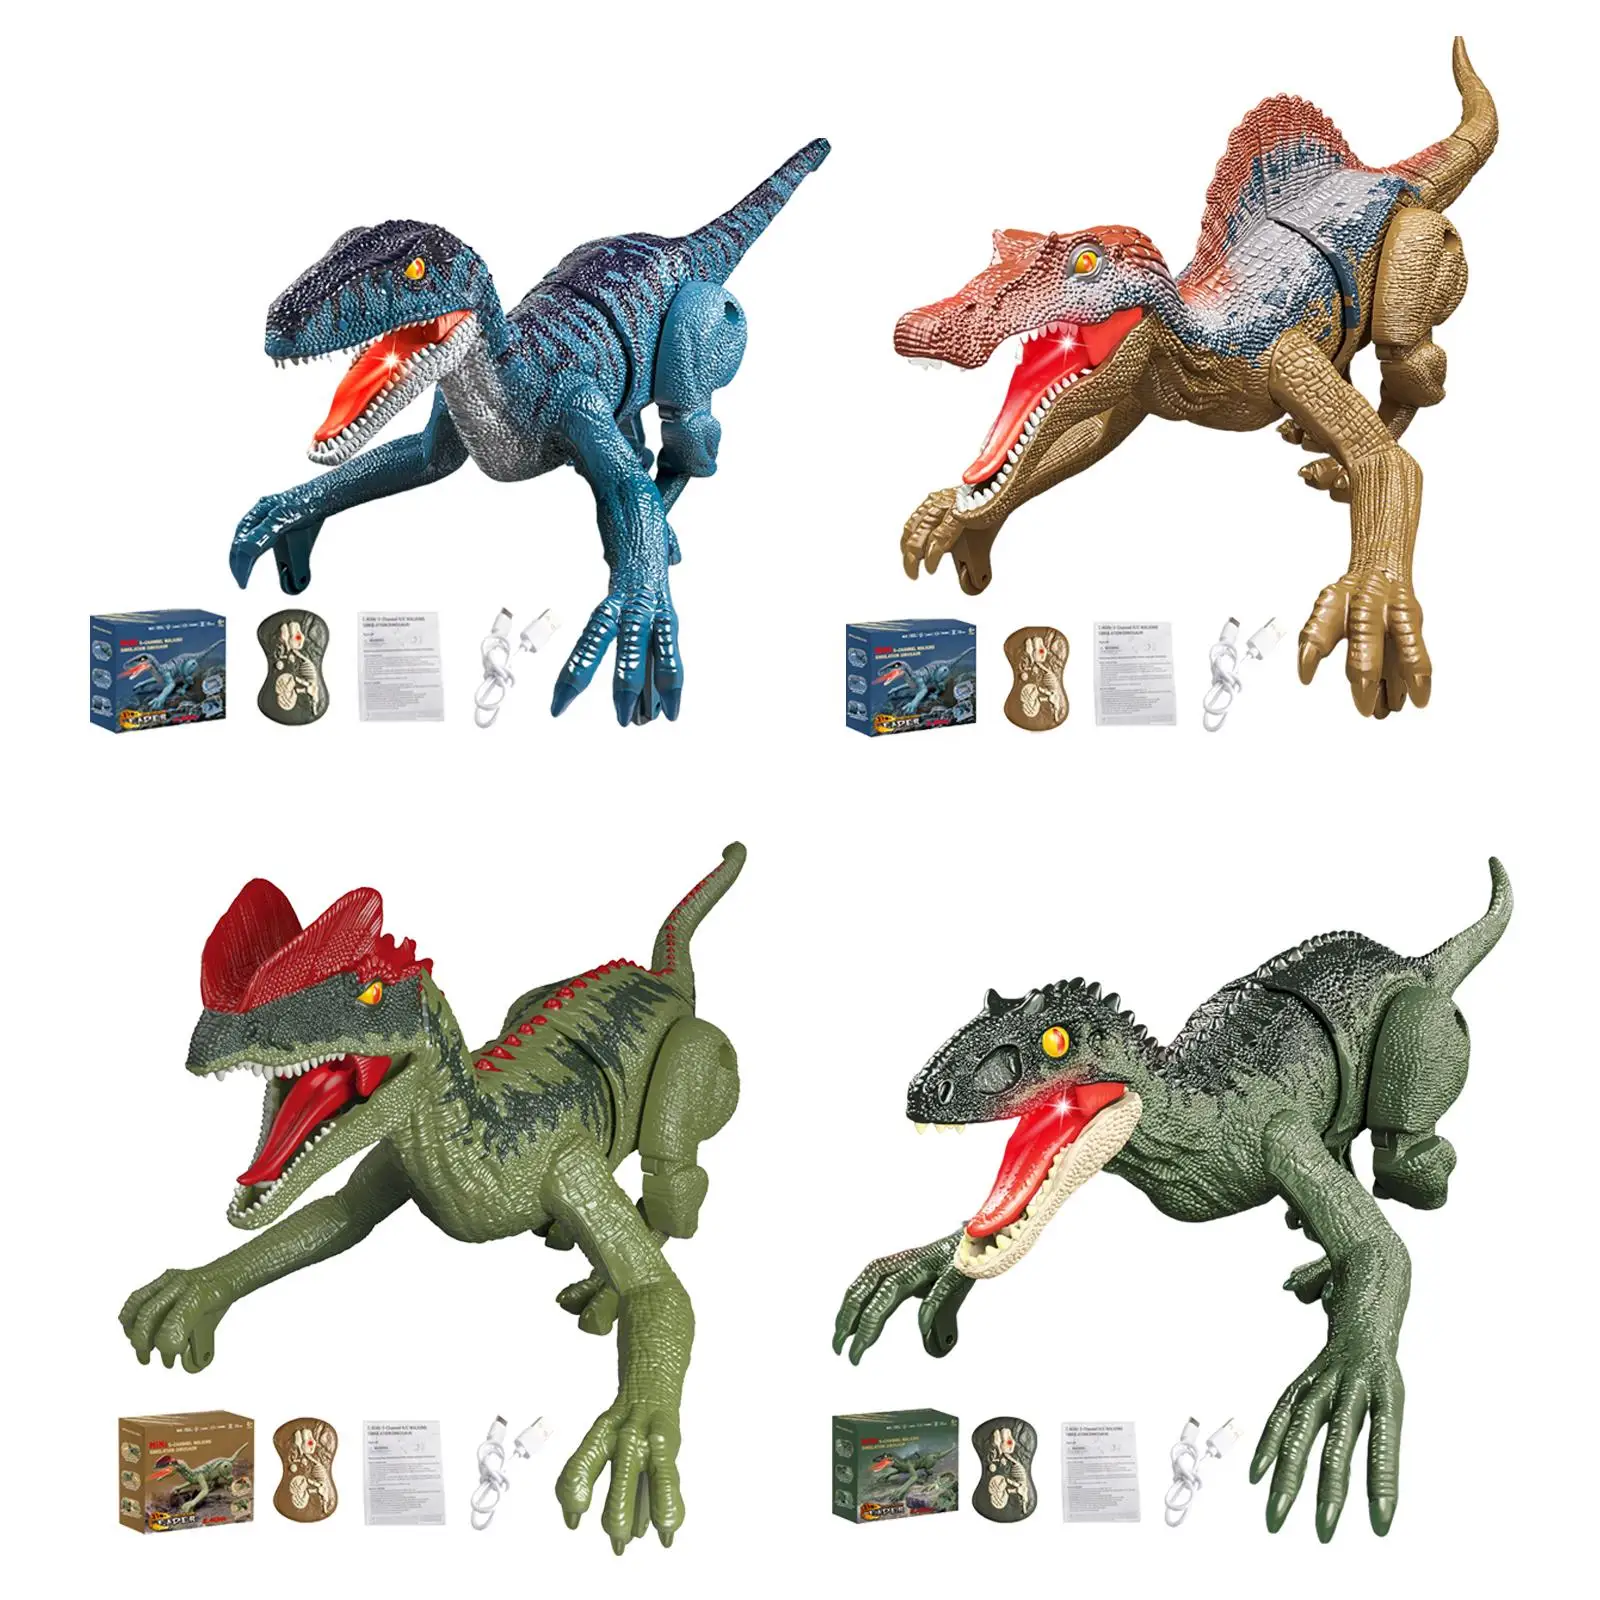 Electric Dinosaur Toys Realistic Play Dinosaur Toy Remote Control Dinosaur Toys for Toddlers Kids Girls Children Birthday Gifts